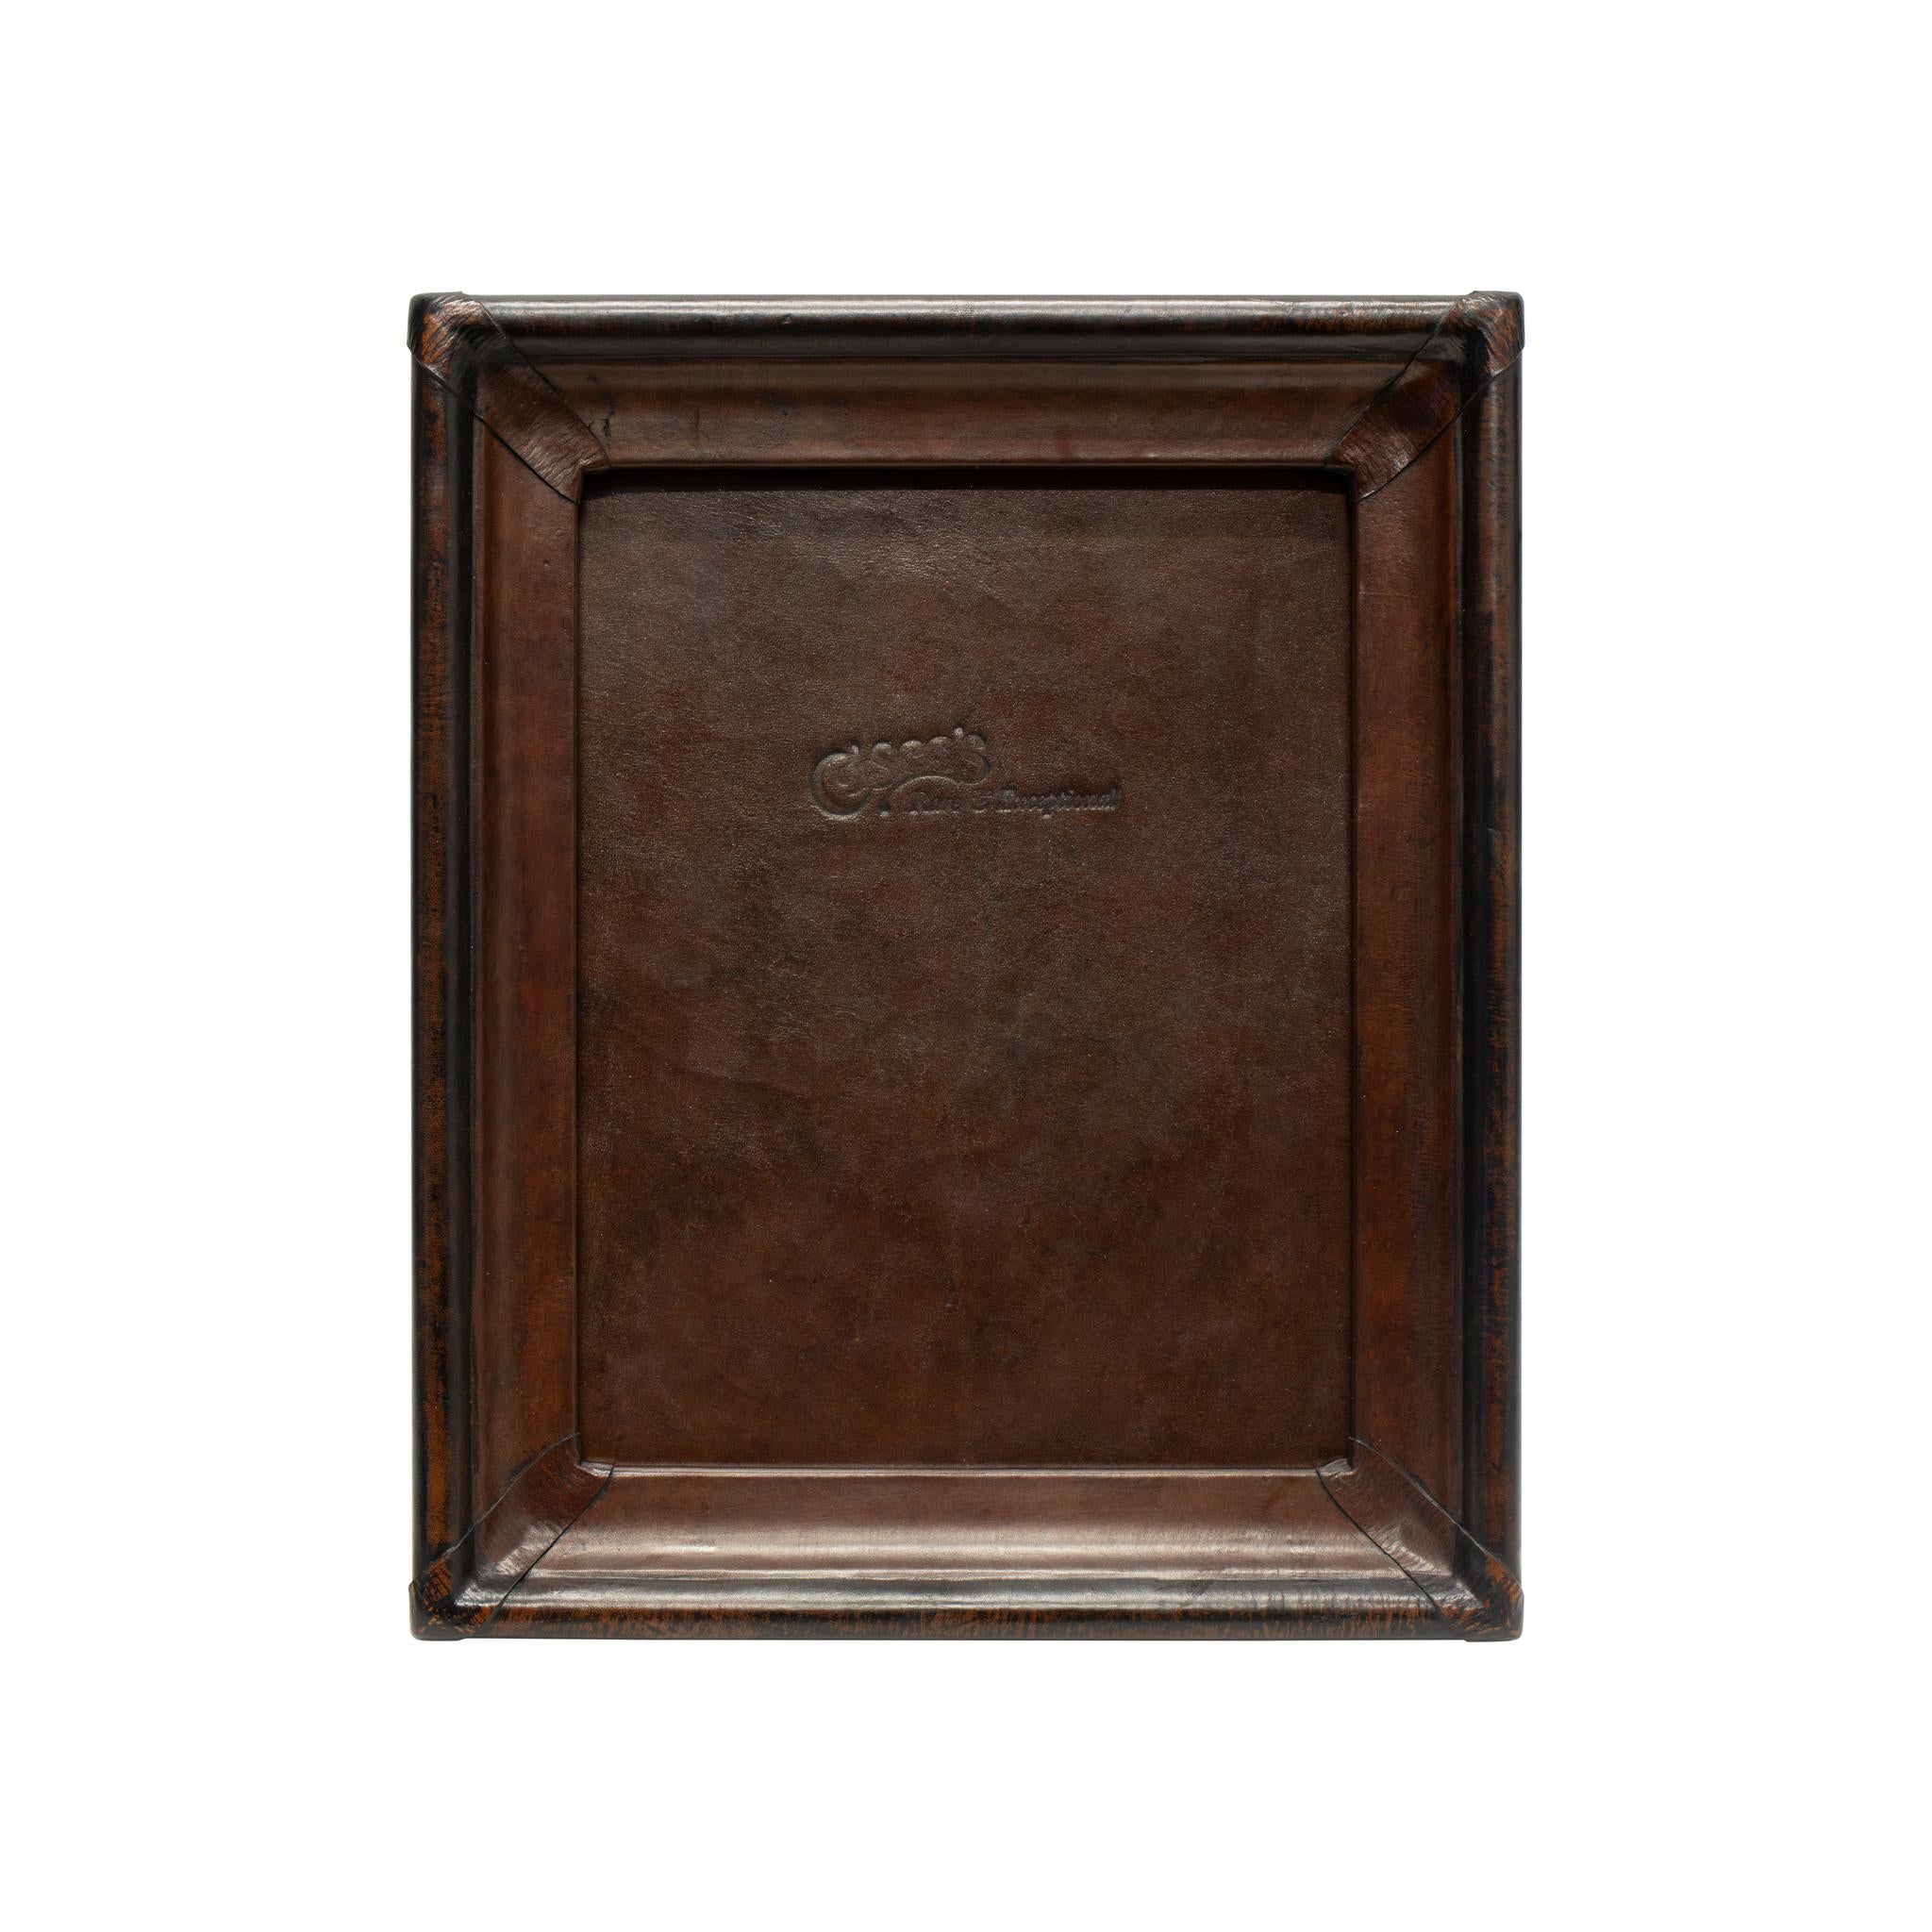 5x7 dark brown & black leather tabletop picture frame. Cisco's premium leather picture frames add the perfect accent to any home or office. Each frame is skillfully crafted by artisan saddle makers using genuine cowhide. Color: Dark brown with